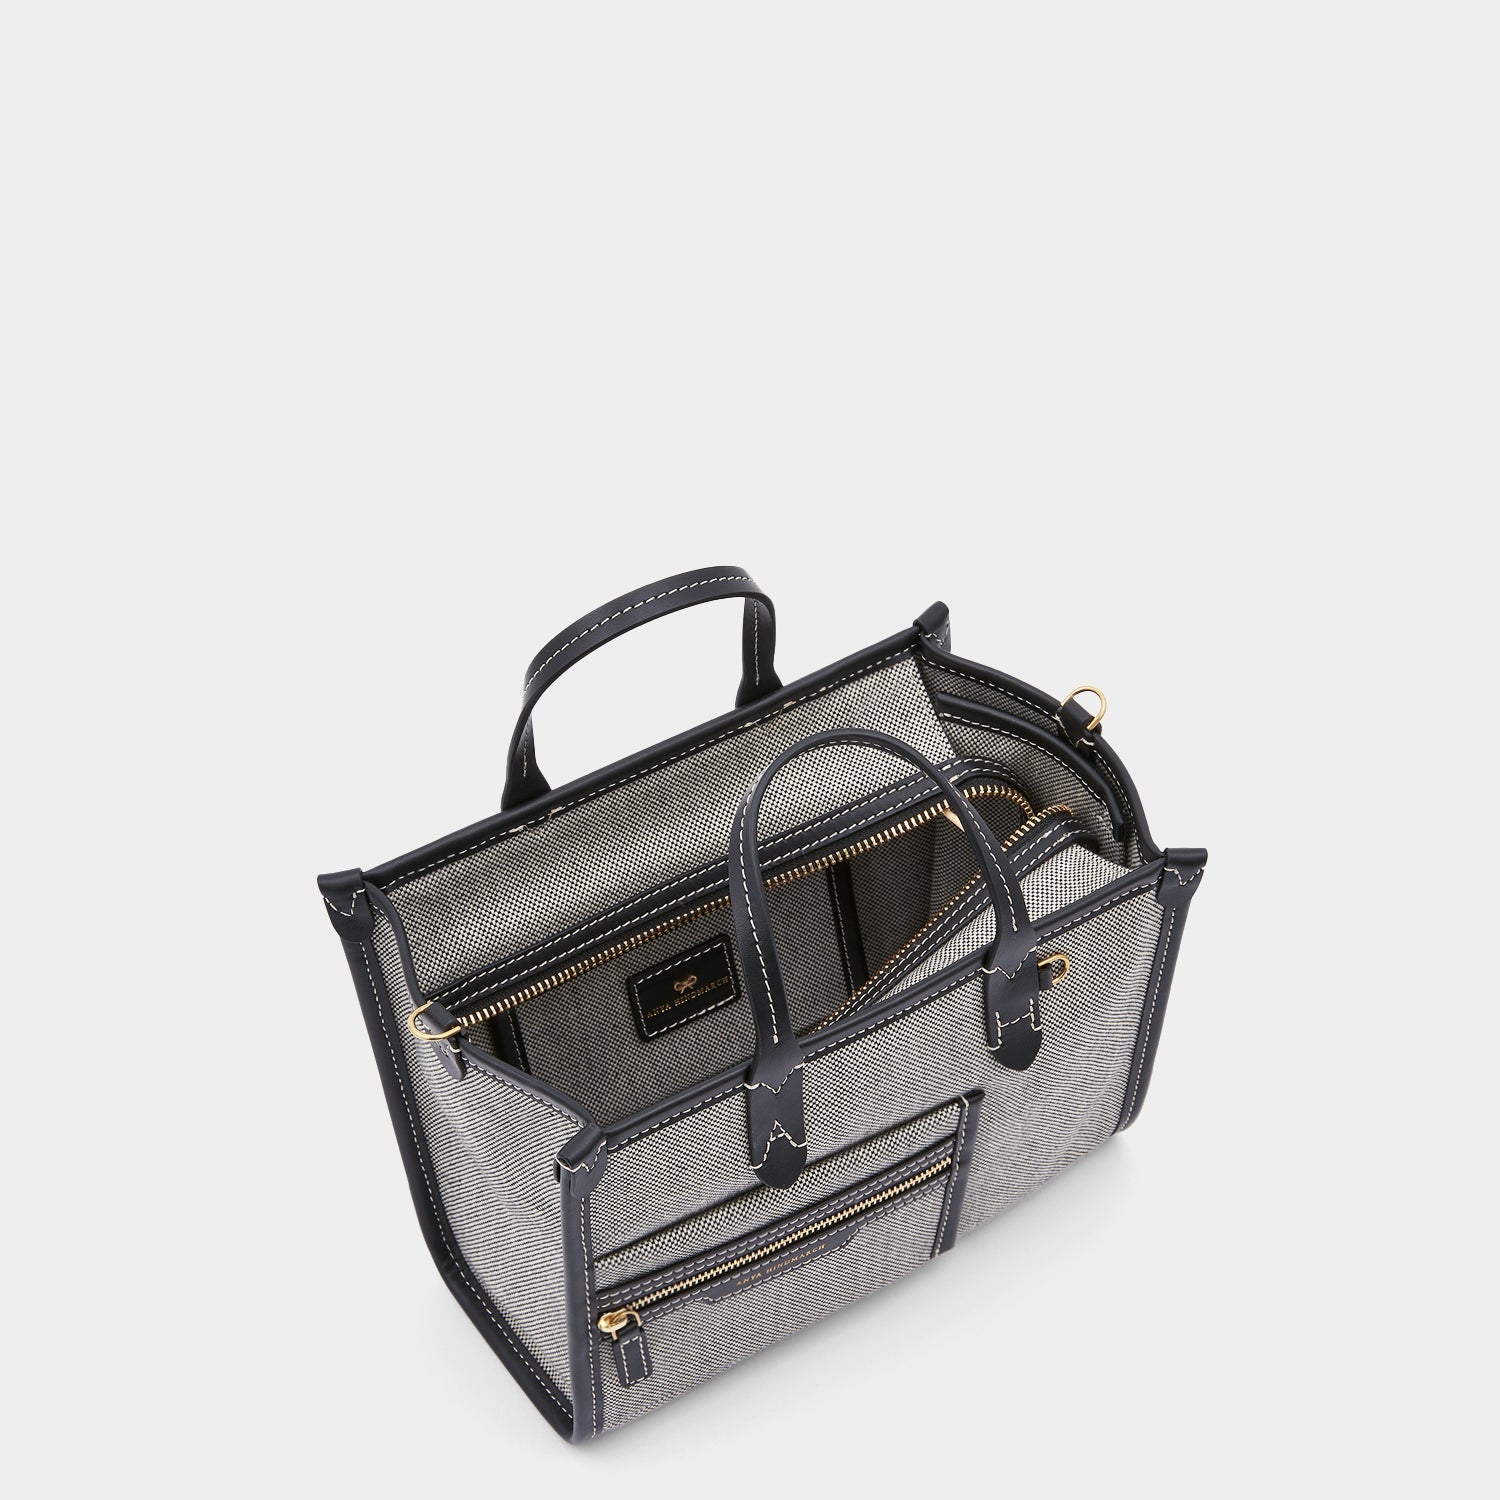 Pocket XS Tote -

                  
                    Mixed Canvas in Salt and Pepper -
                  

                  Anya Hindmarch US
